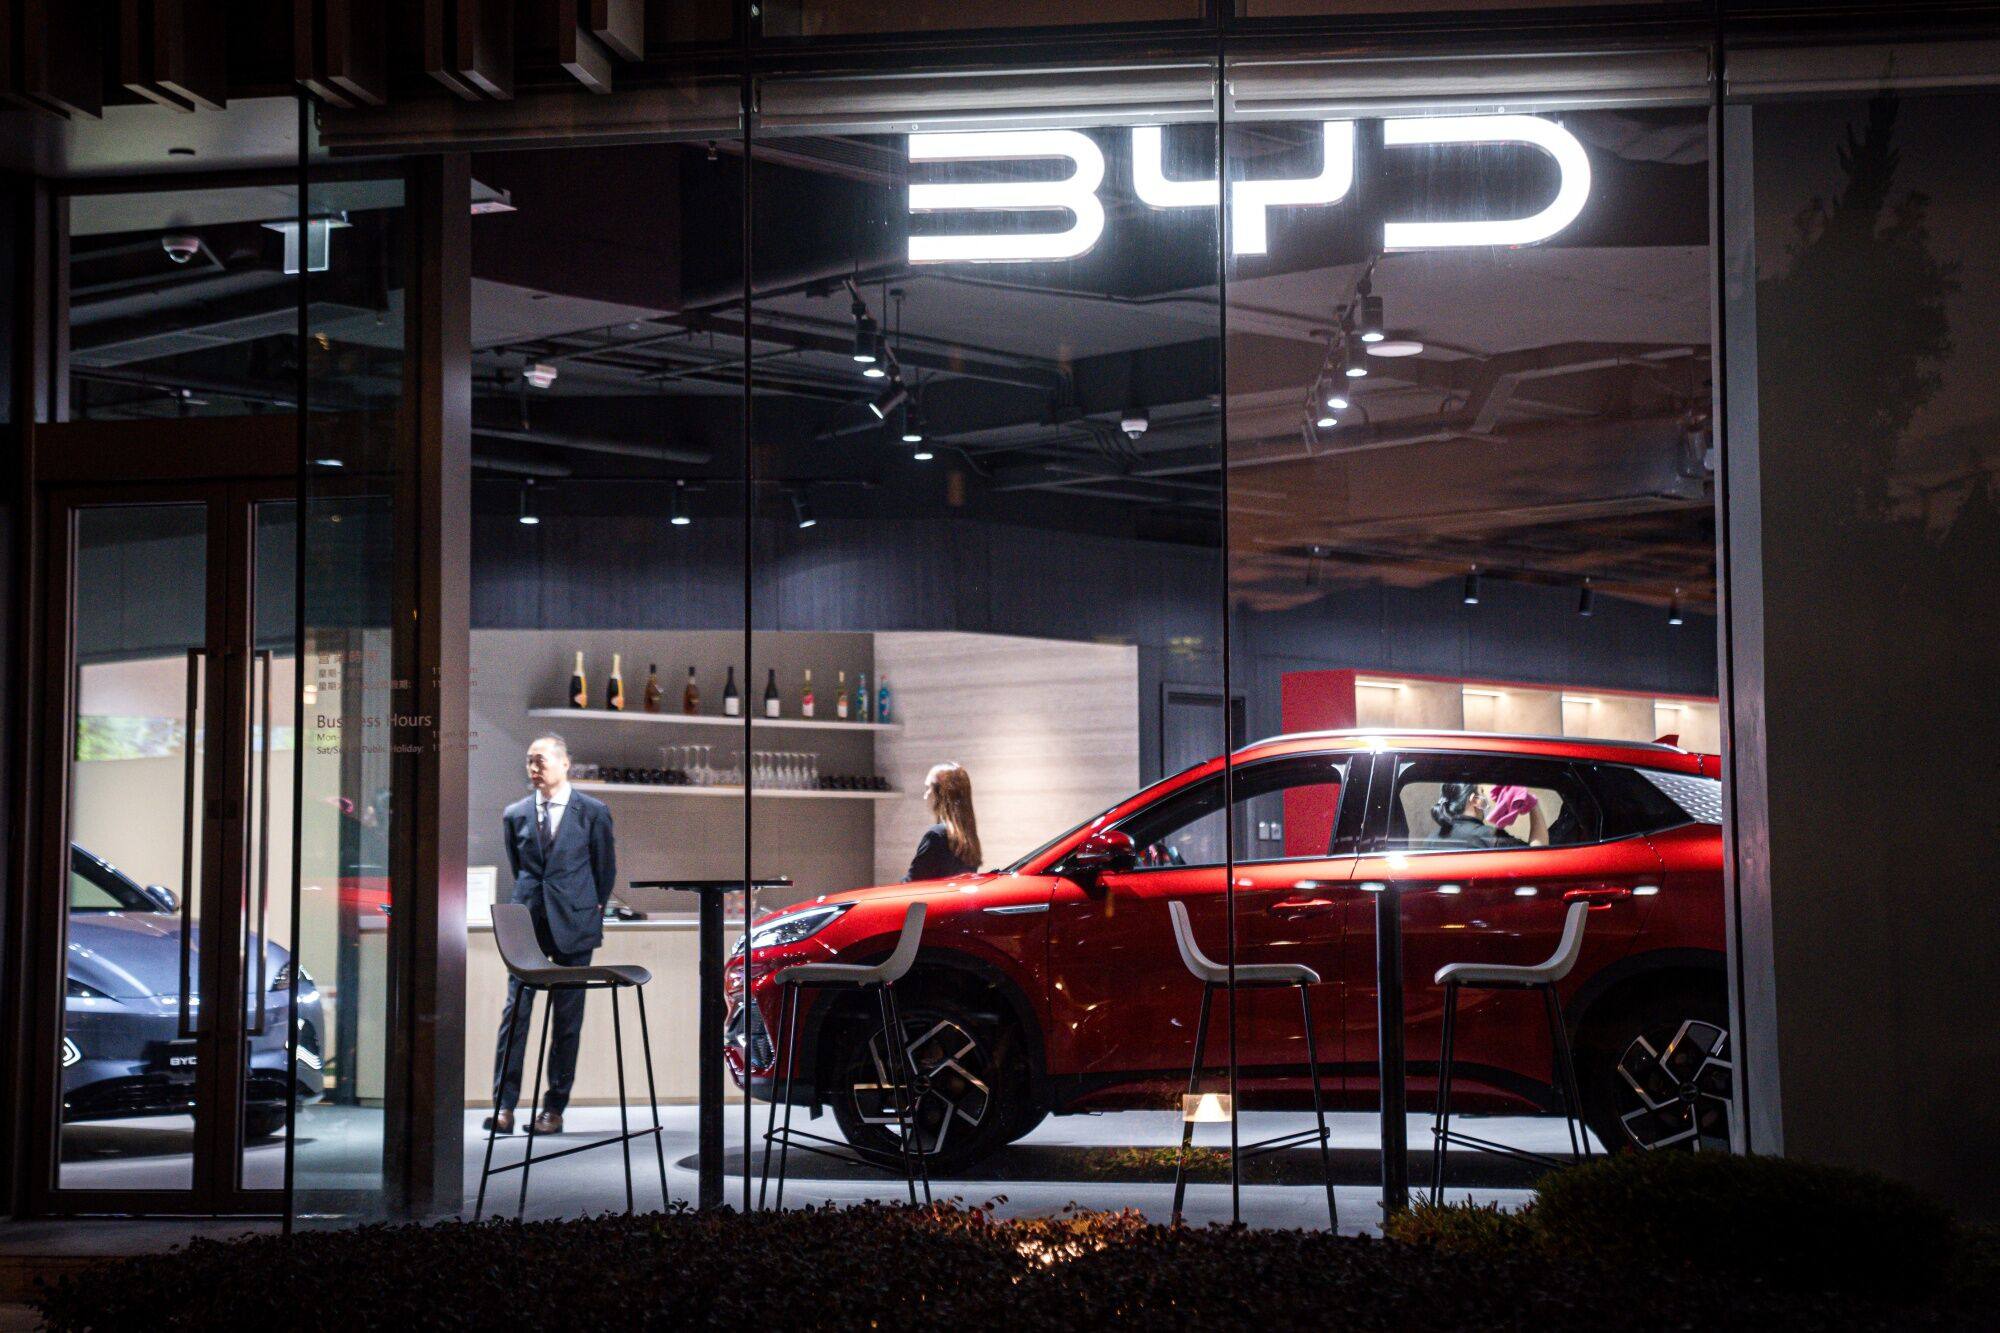 A car showroom in Hong Kong on January 13. In mainland China, the world’s biggest EV market, sales growth is expected to slow to 20 per cent this year, from a projected 30 per cent last year. Photo: Bloomberg